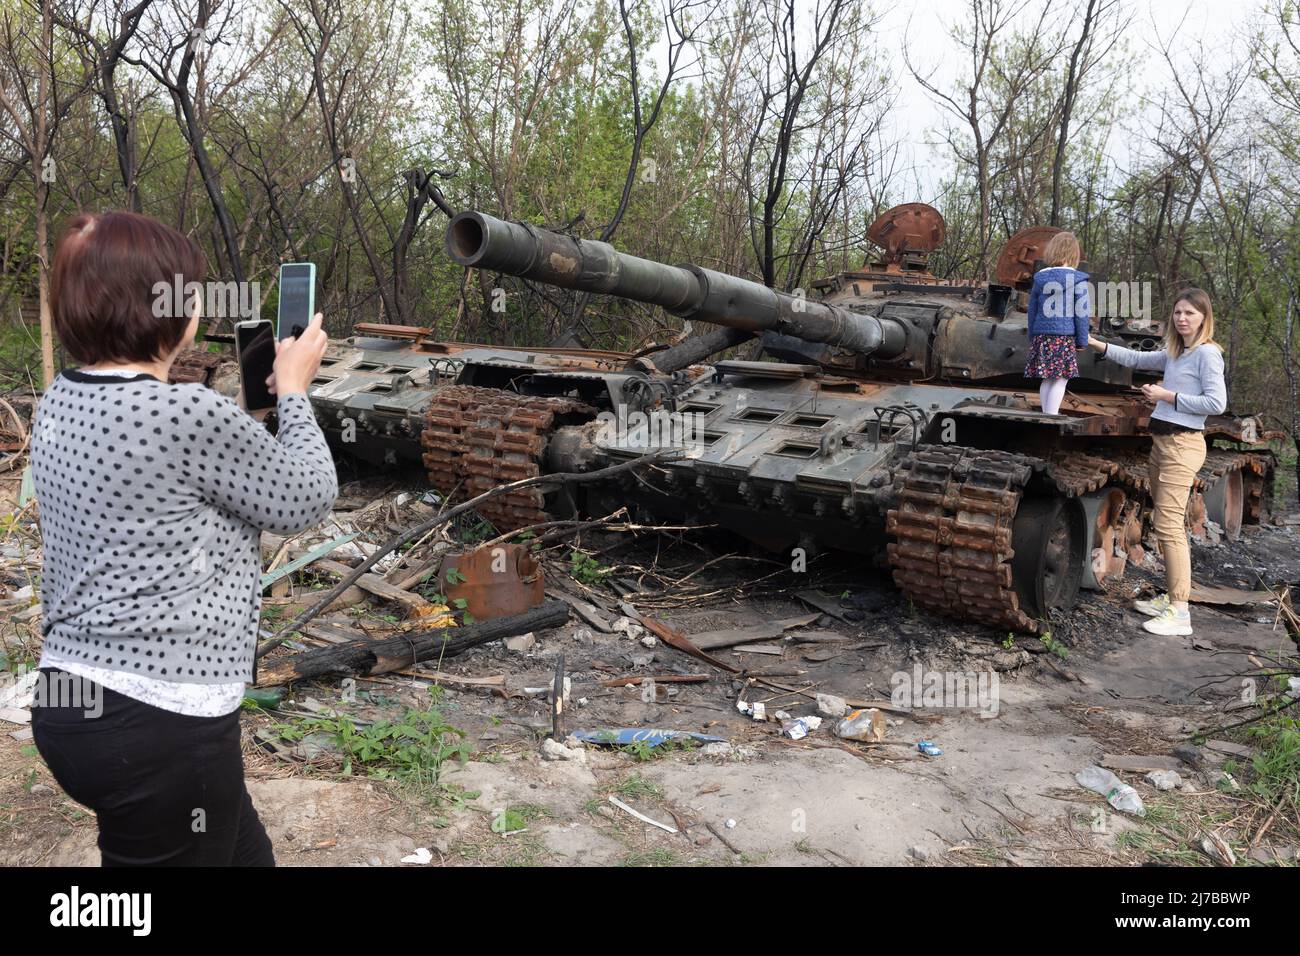 A woman takes photos of a girl standing on the tower of a destroyed Russian tank near Makariv village, Kyiv region. Russia invaded Ukraine on 24 February 2022, triggering the largest military attack in Europe since World War II. (Photo by Mykhaylo Palinchak / SOPA Images/Sipa USA) Stock Photo